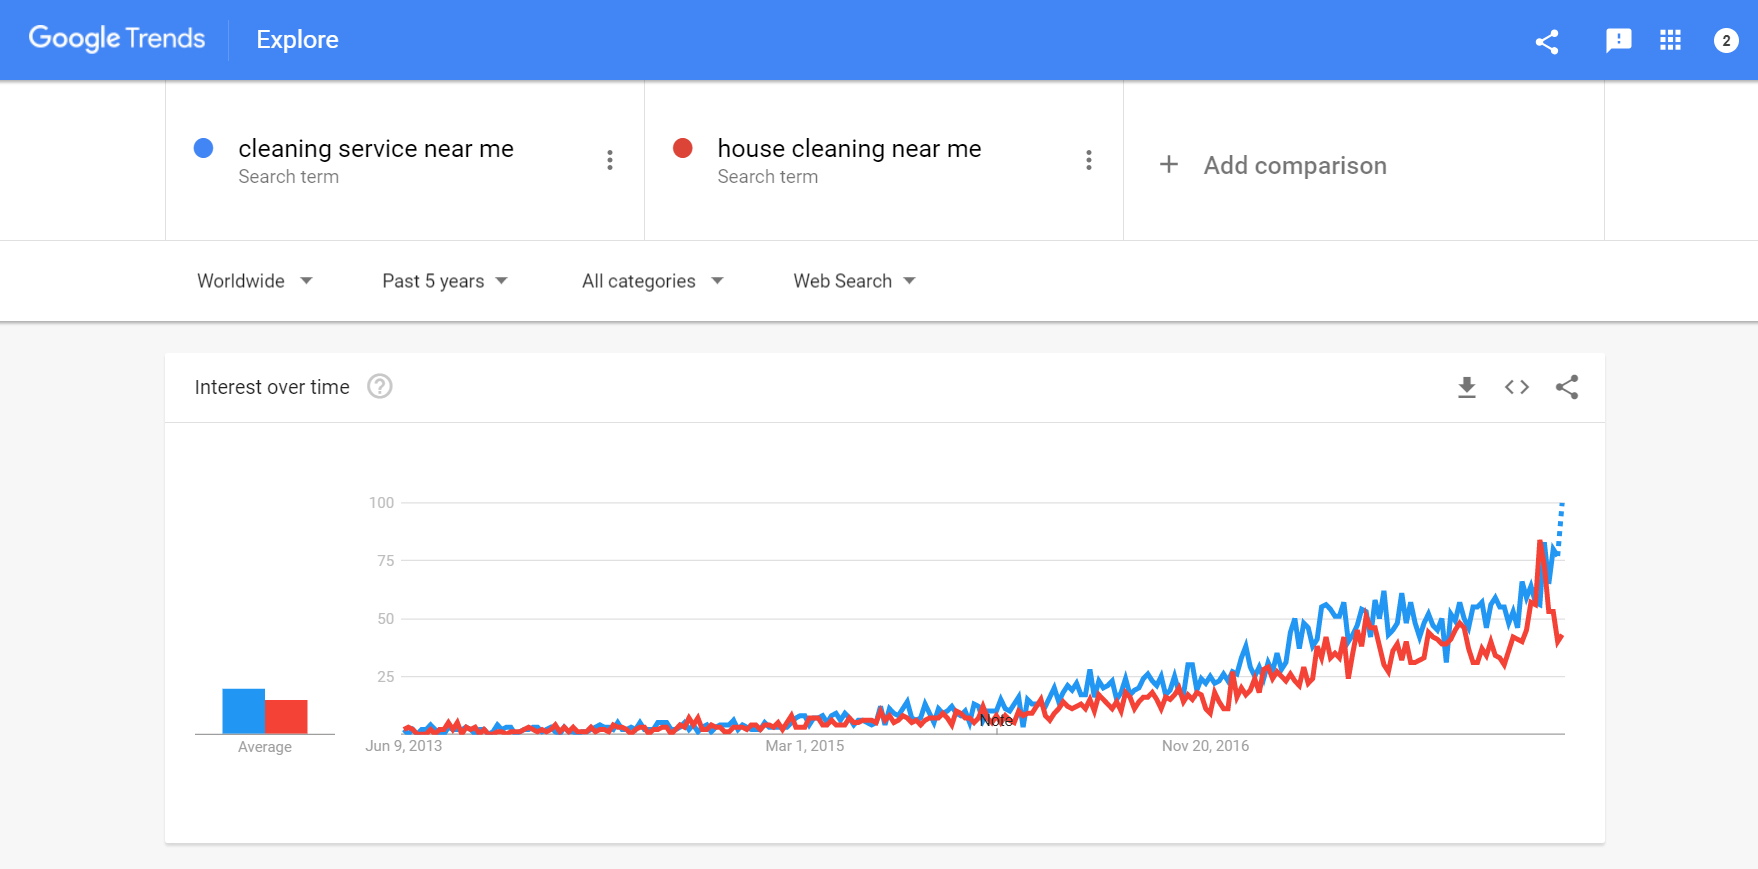 Uber for House Cleaning Market Trends